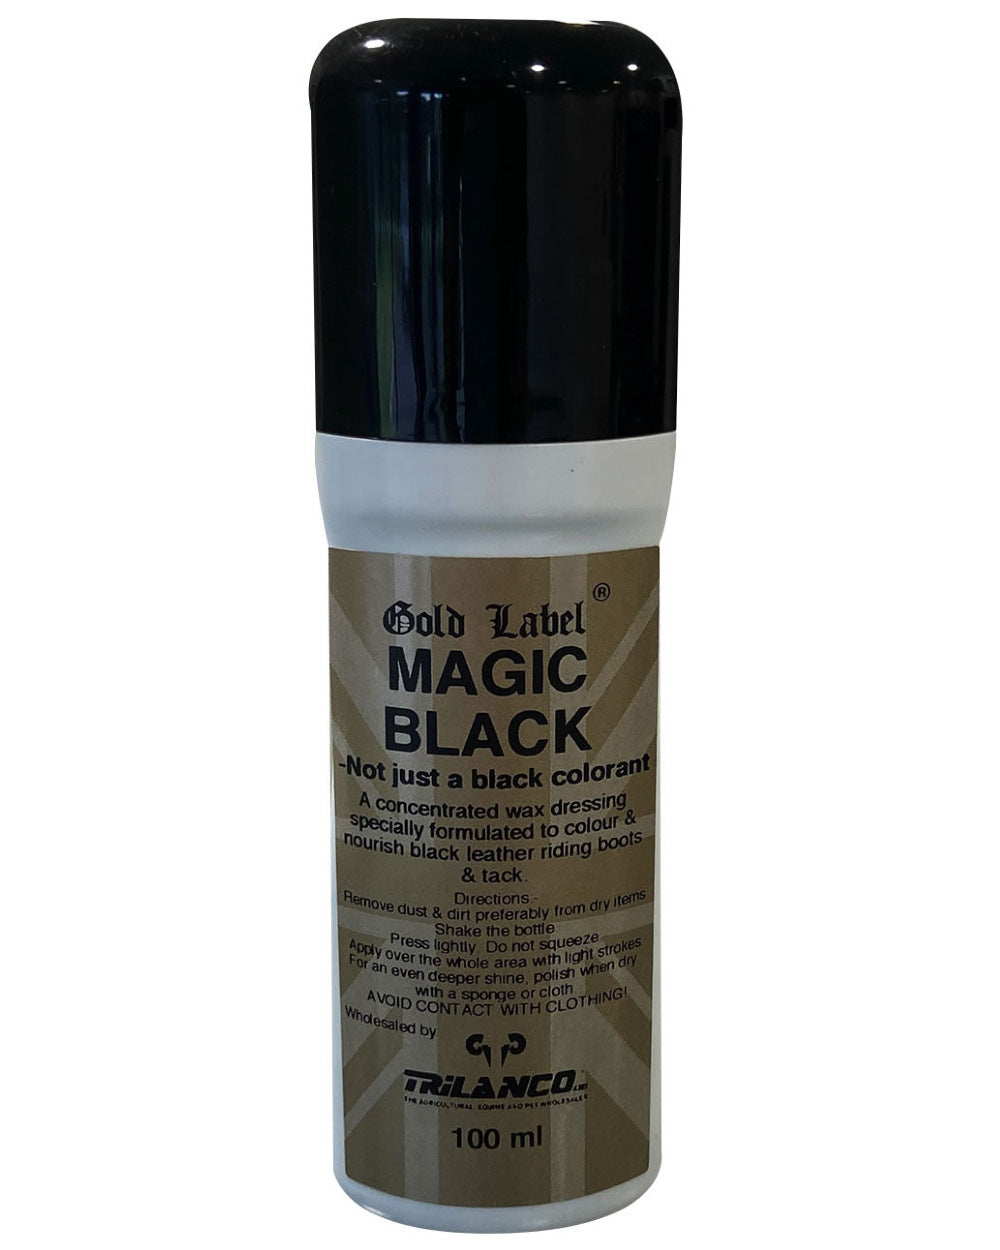 Gold Label Magic Black On A White Background